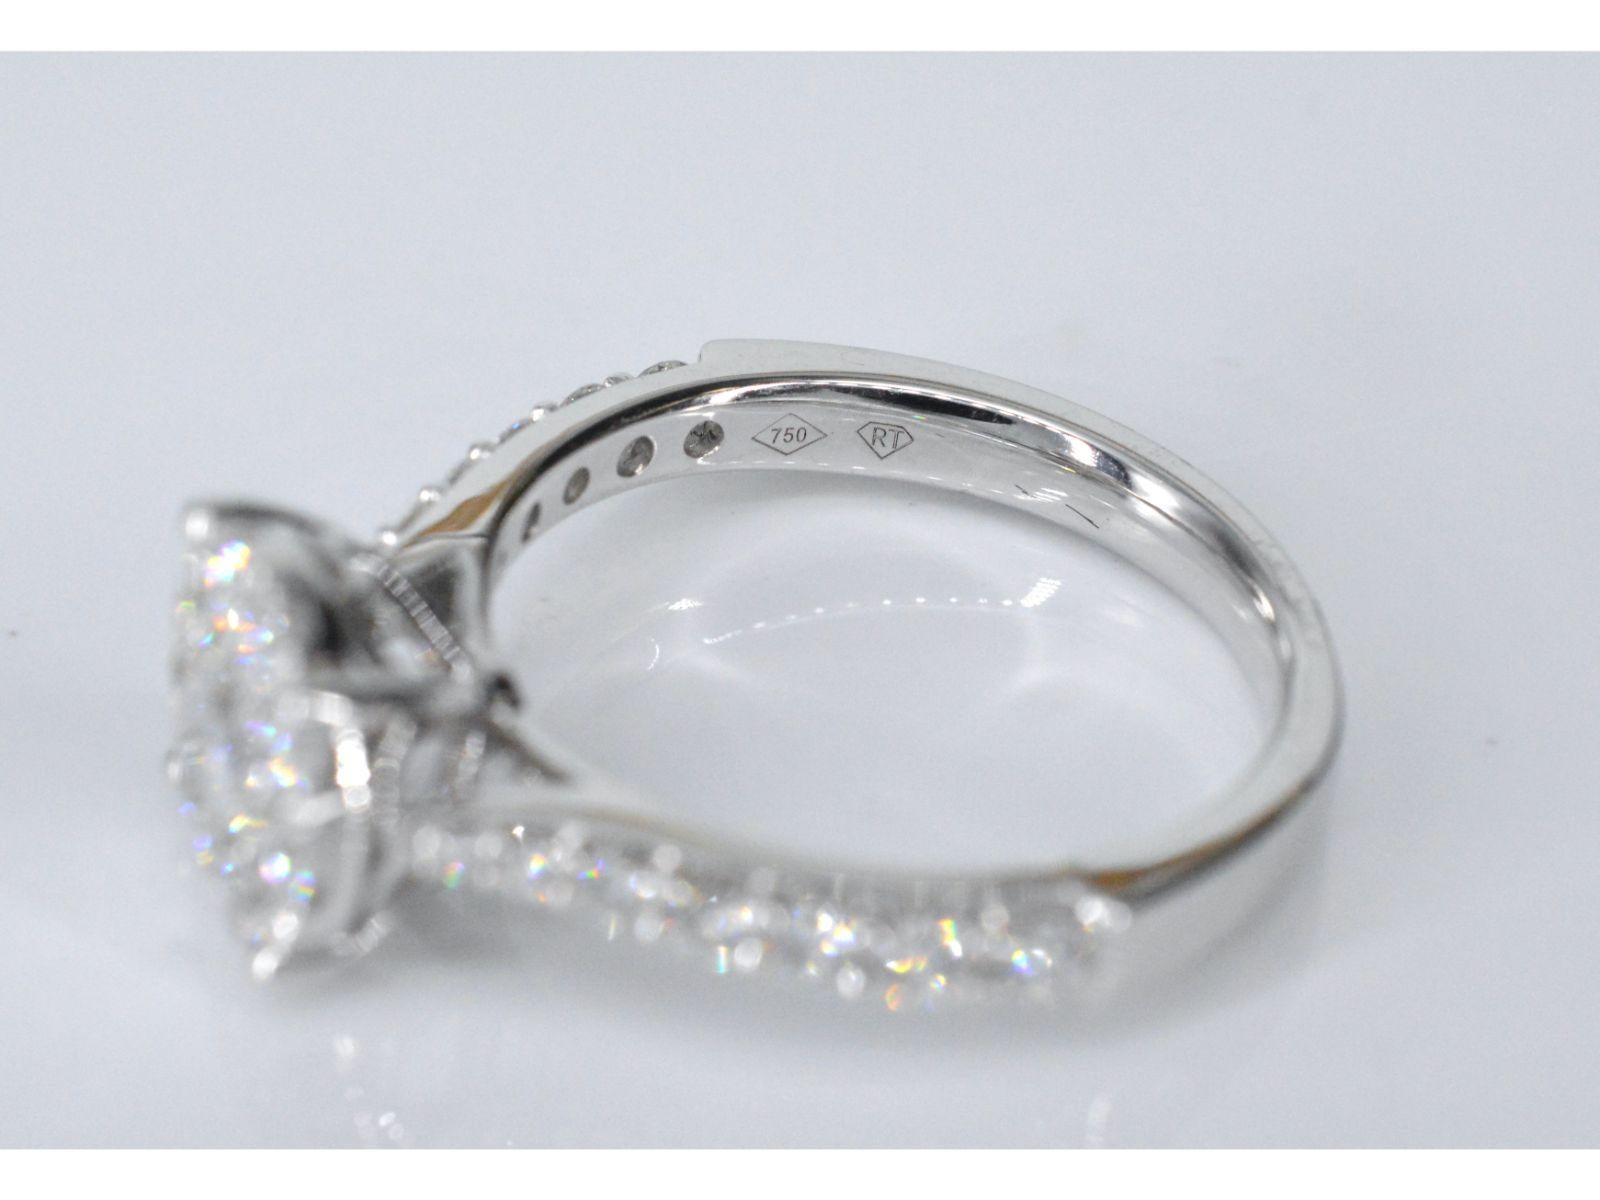 Women's White Gold Entourage Ring with Large Brilliant Cut Diamonds For Sale